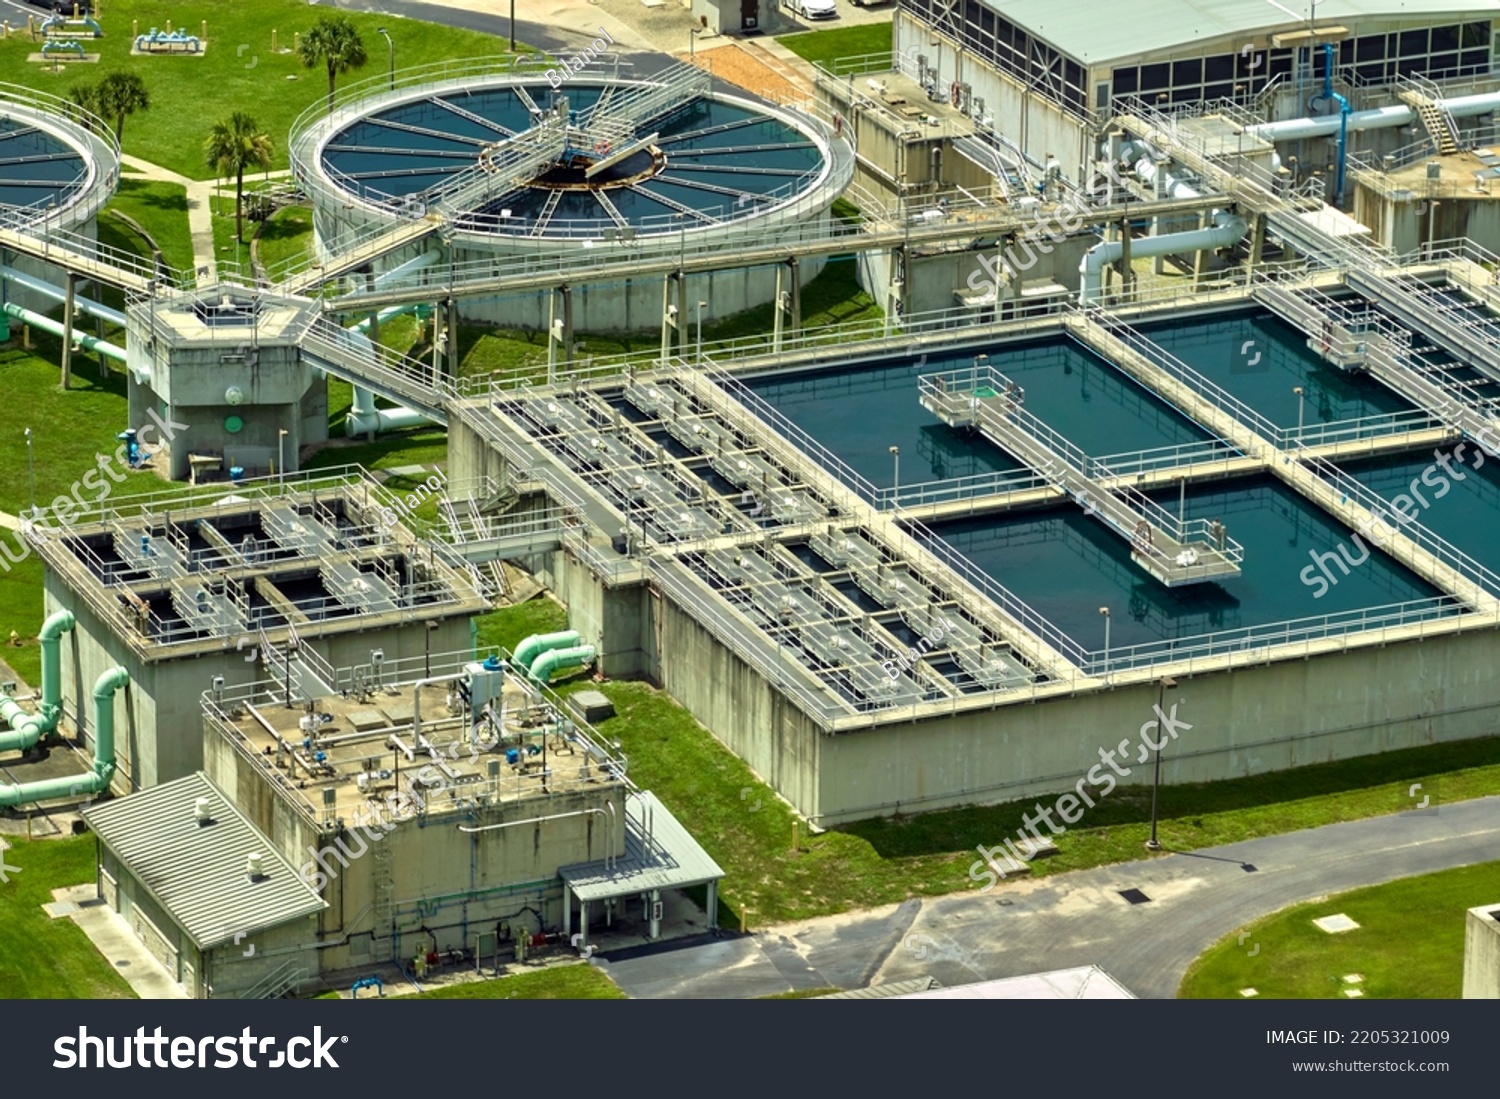 Aerial view of modern water cleaning facility at urban wastewater treatment plant. Purification process of removing undesirable chemicals, suspended solids and gases from contaminated liquid #2205321009